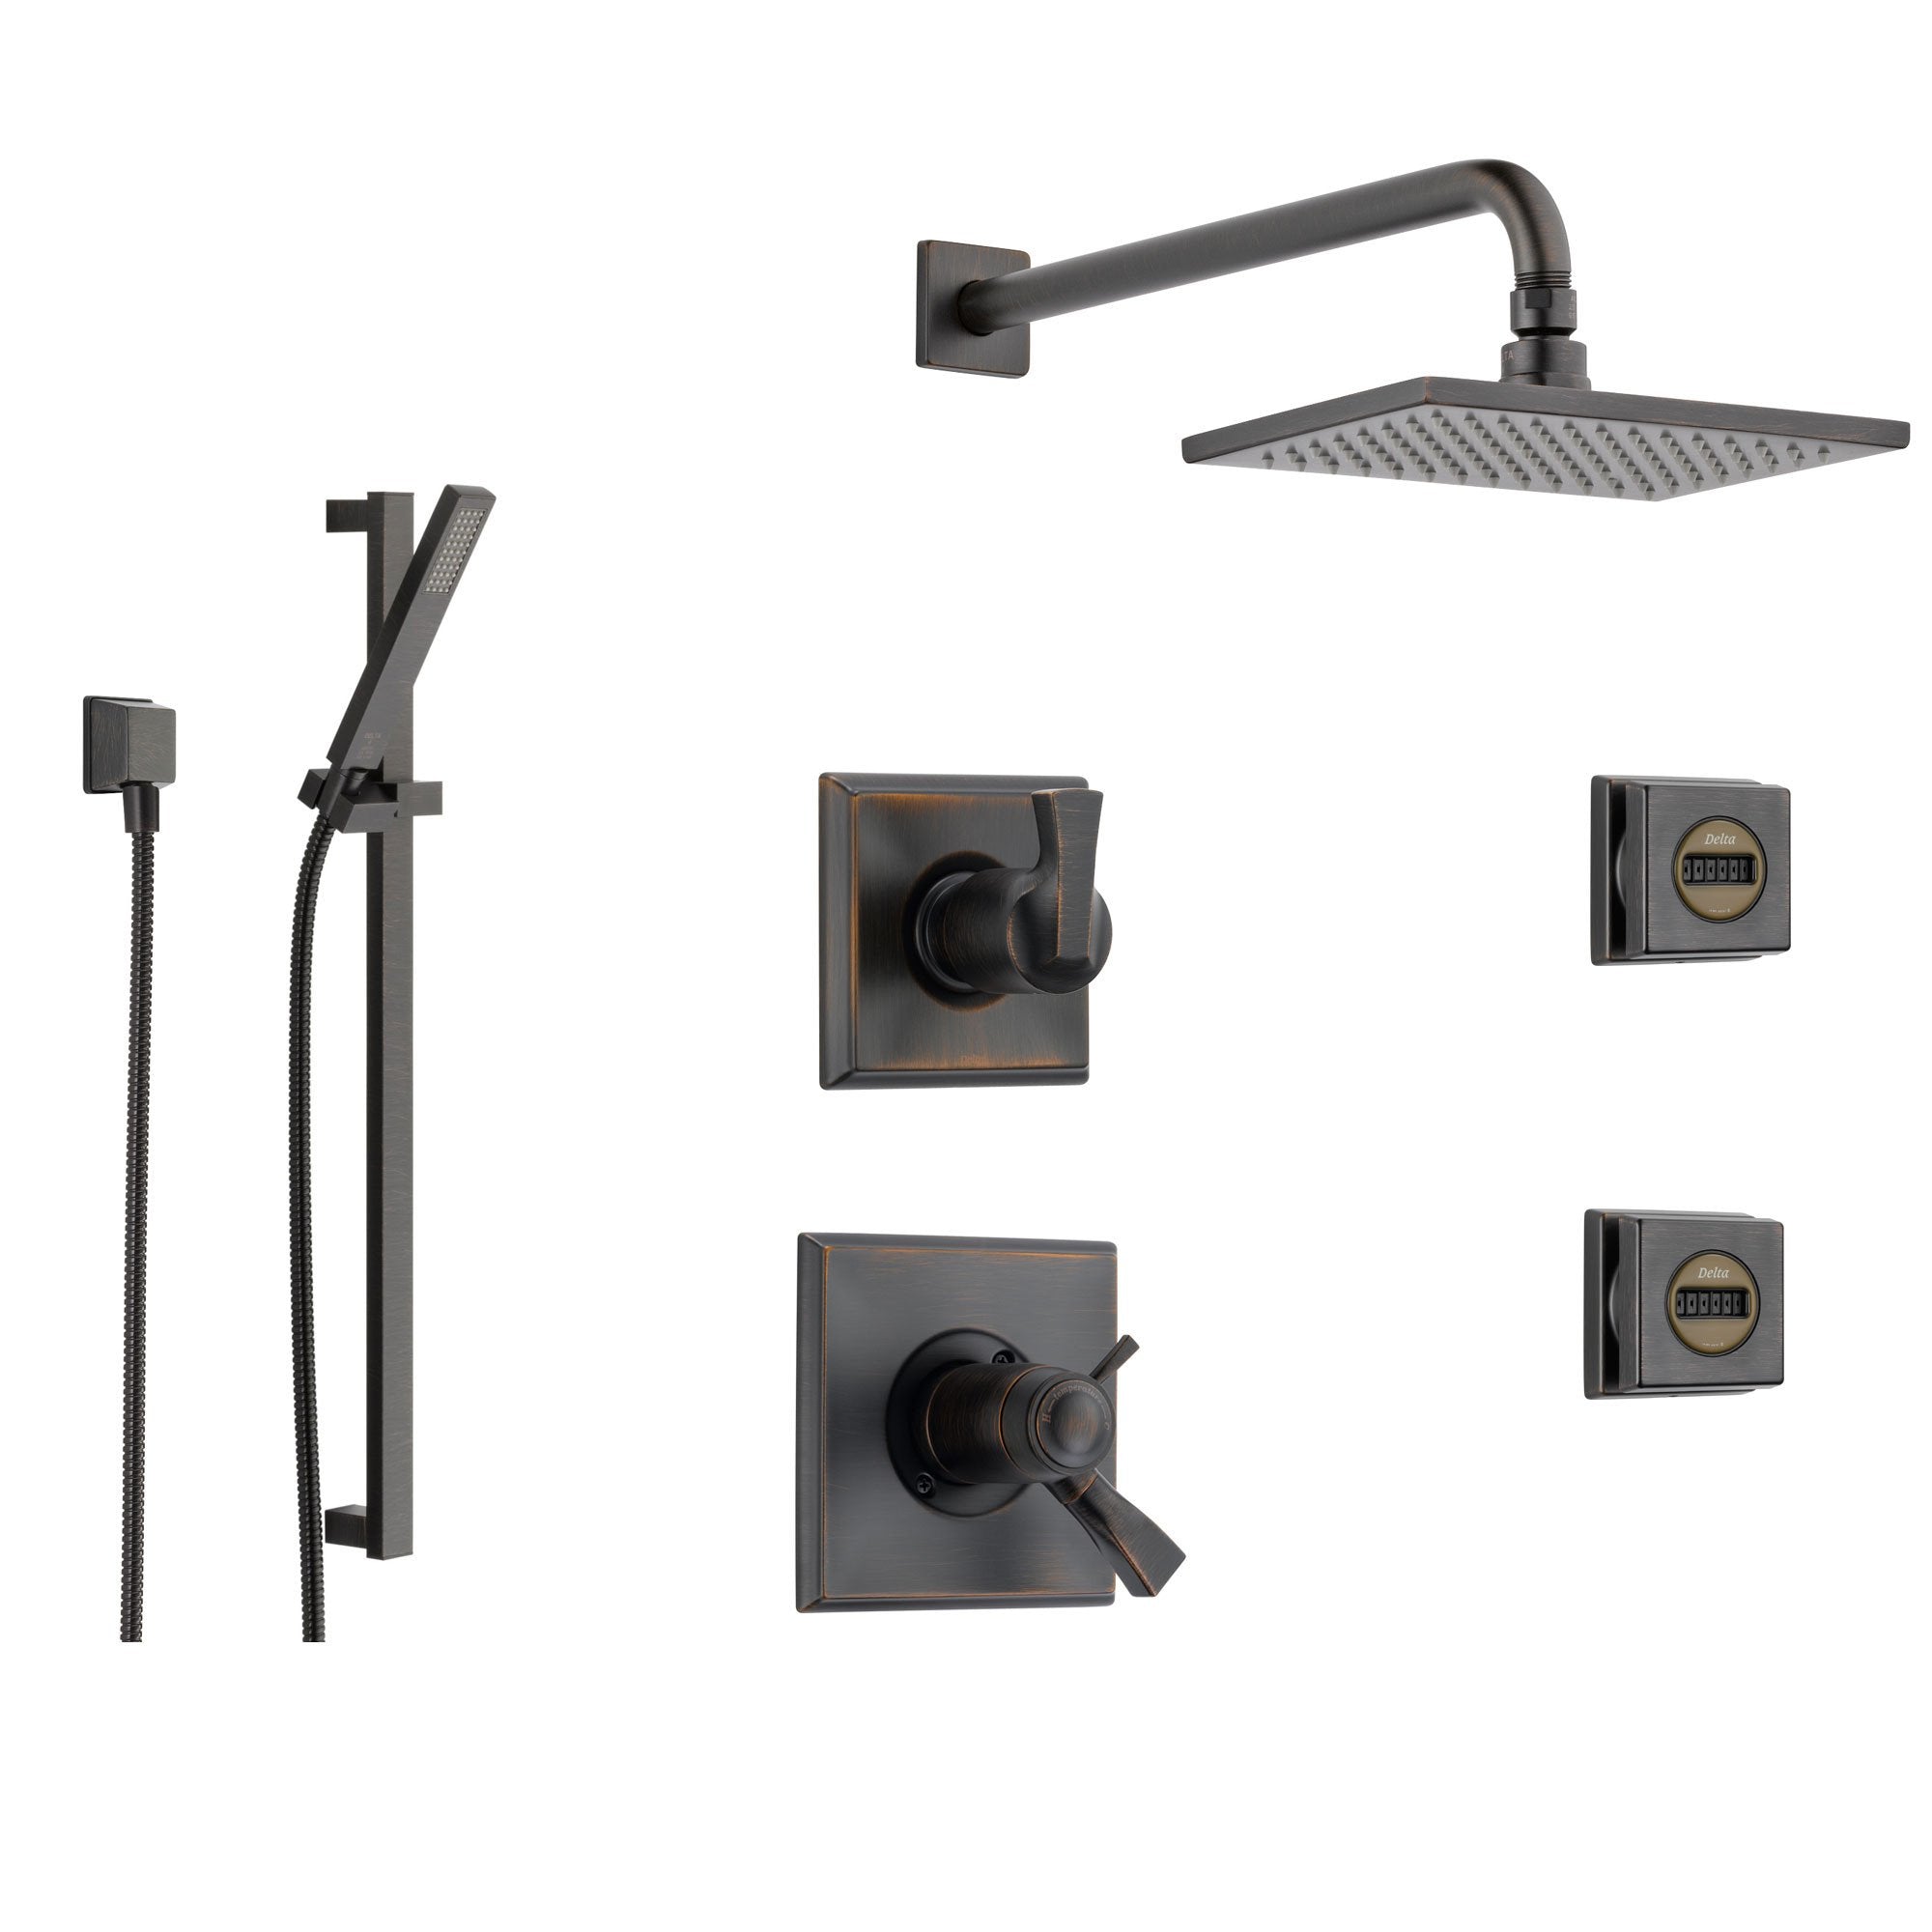 Delta Dryden Venetian Bronze Shower System with Thermostatic Shower Handle, 6-setting Diverter, Modern Square Rain Showerhead, and Hand Shower Spray SS17T5194RB